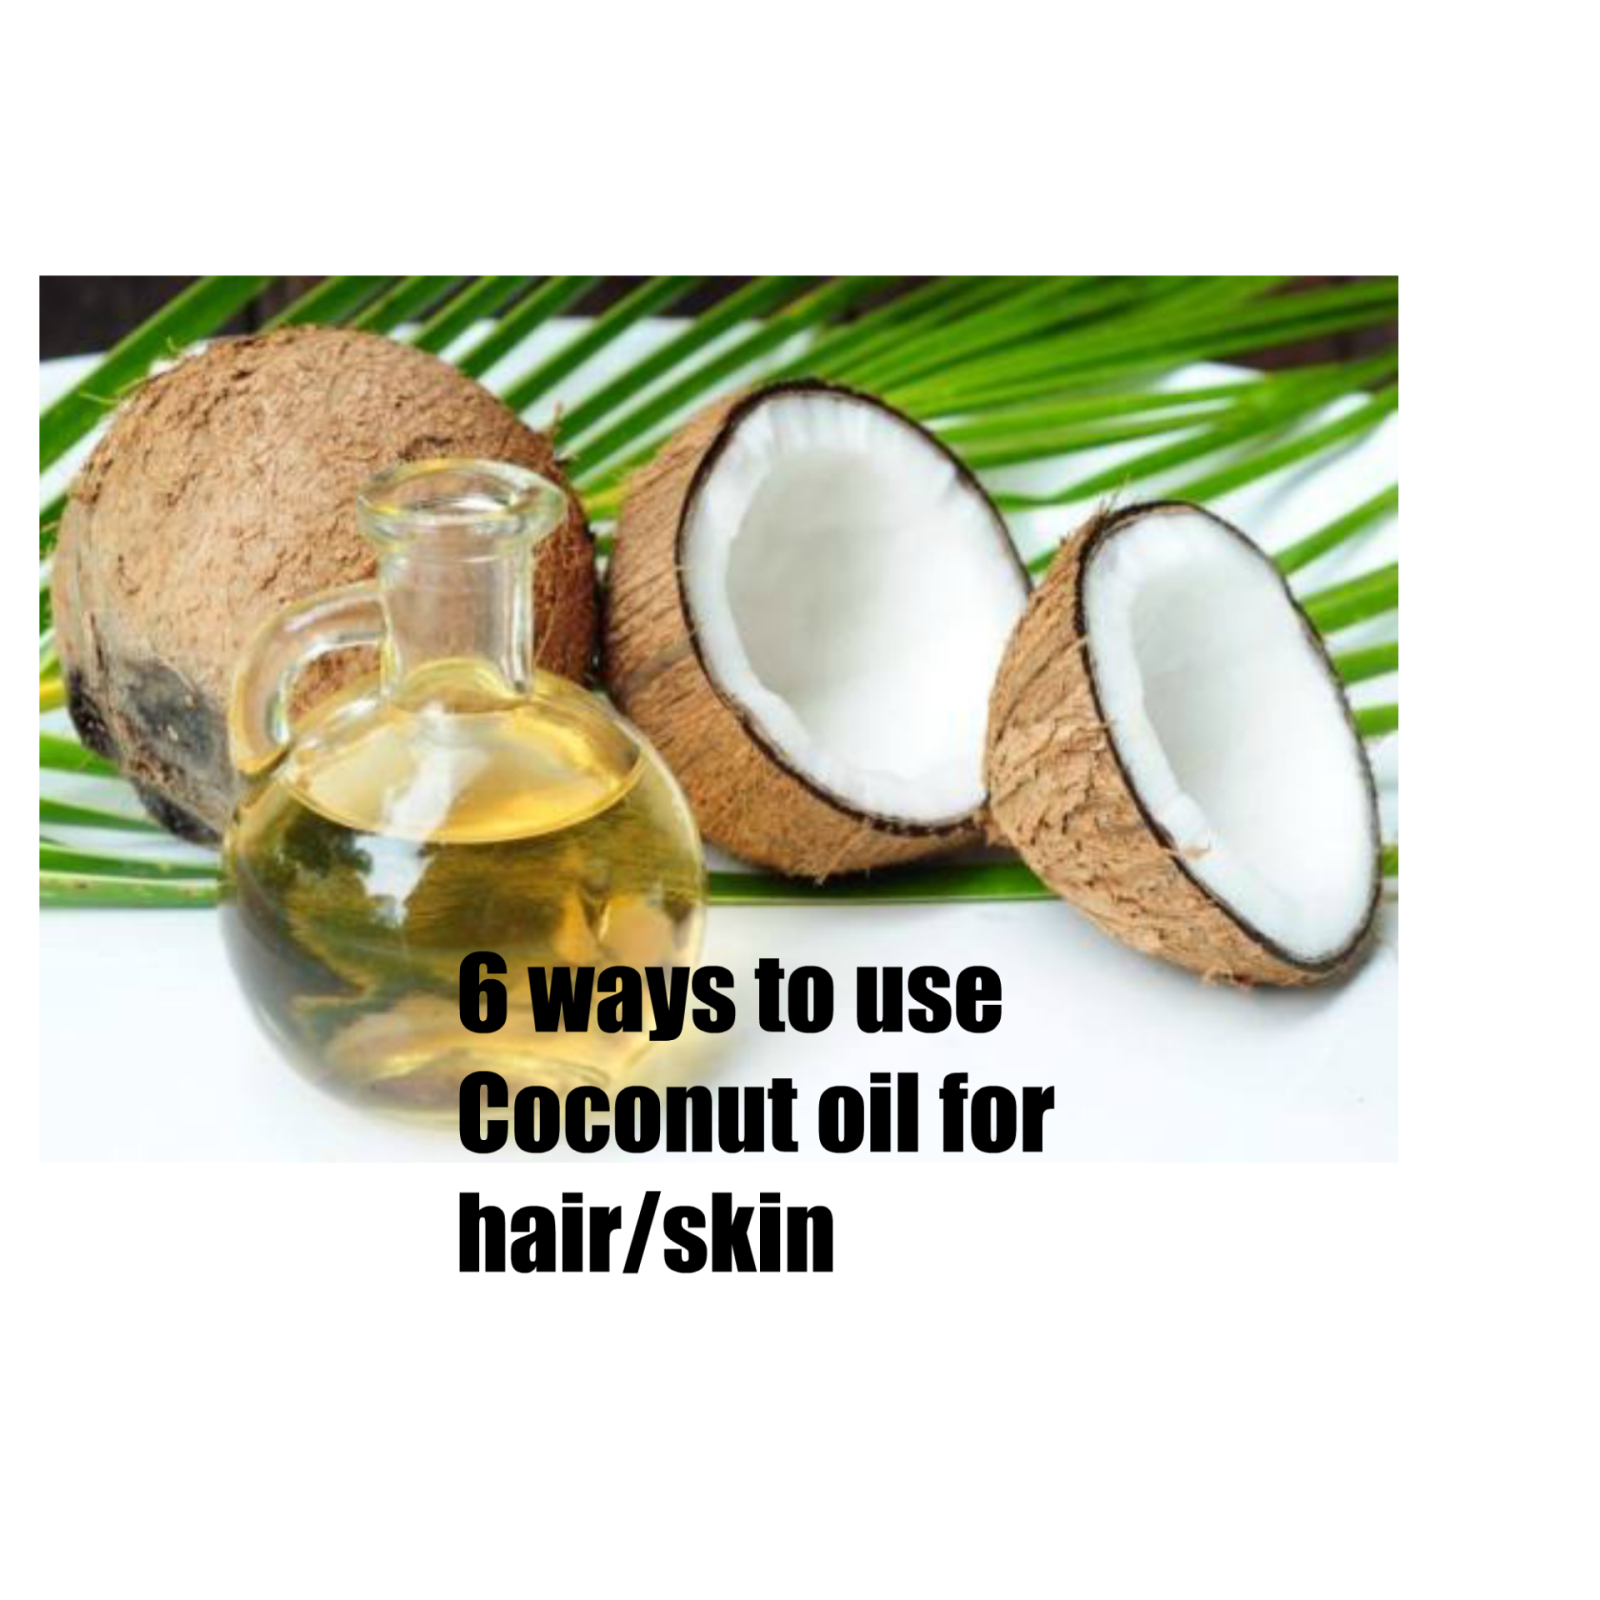 6 ways to use Coconut Oil